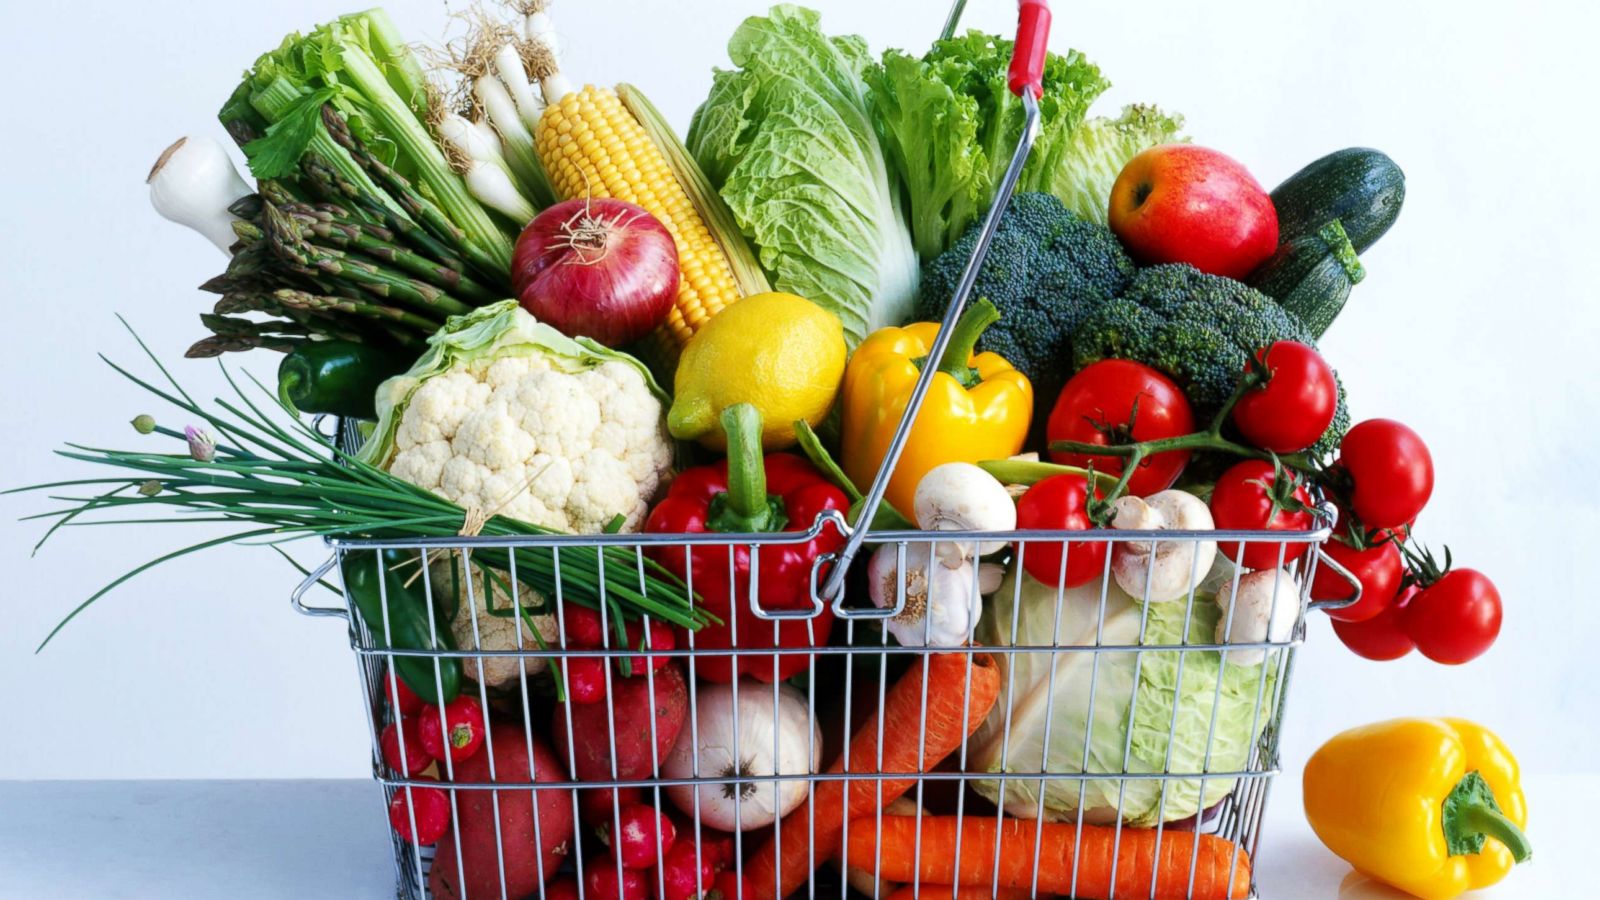 PHOTO: Assorted vegetables in a shopping basket are pictured in this undated stock photo.